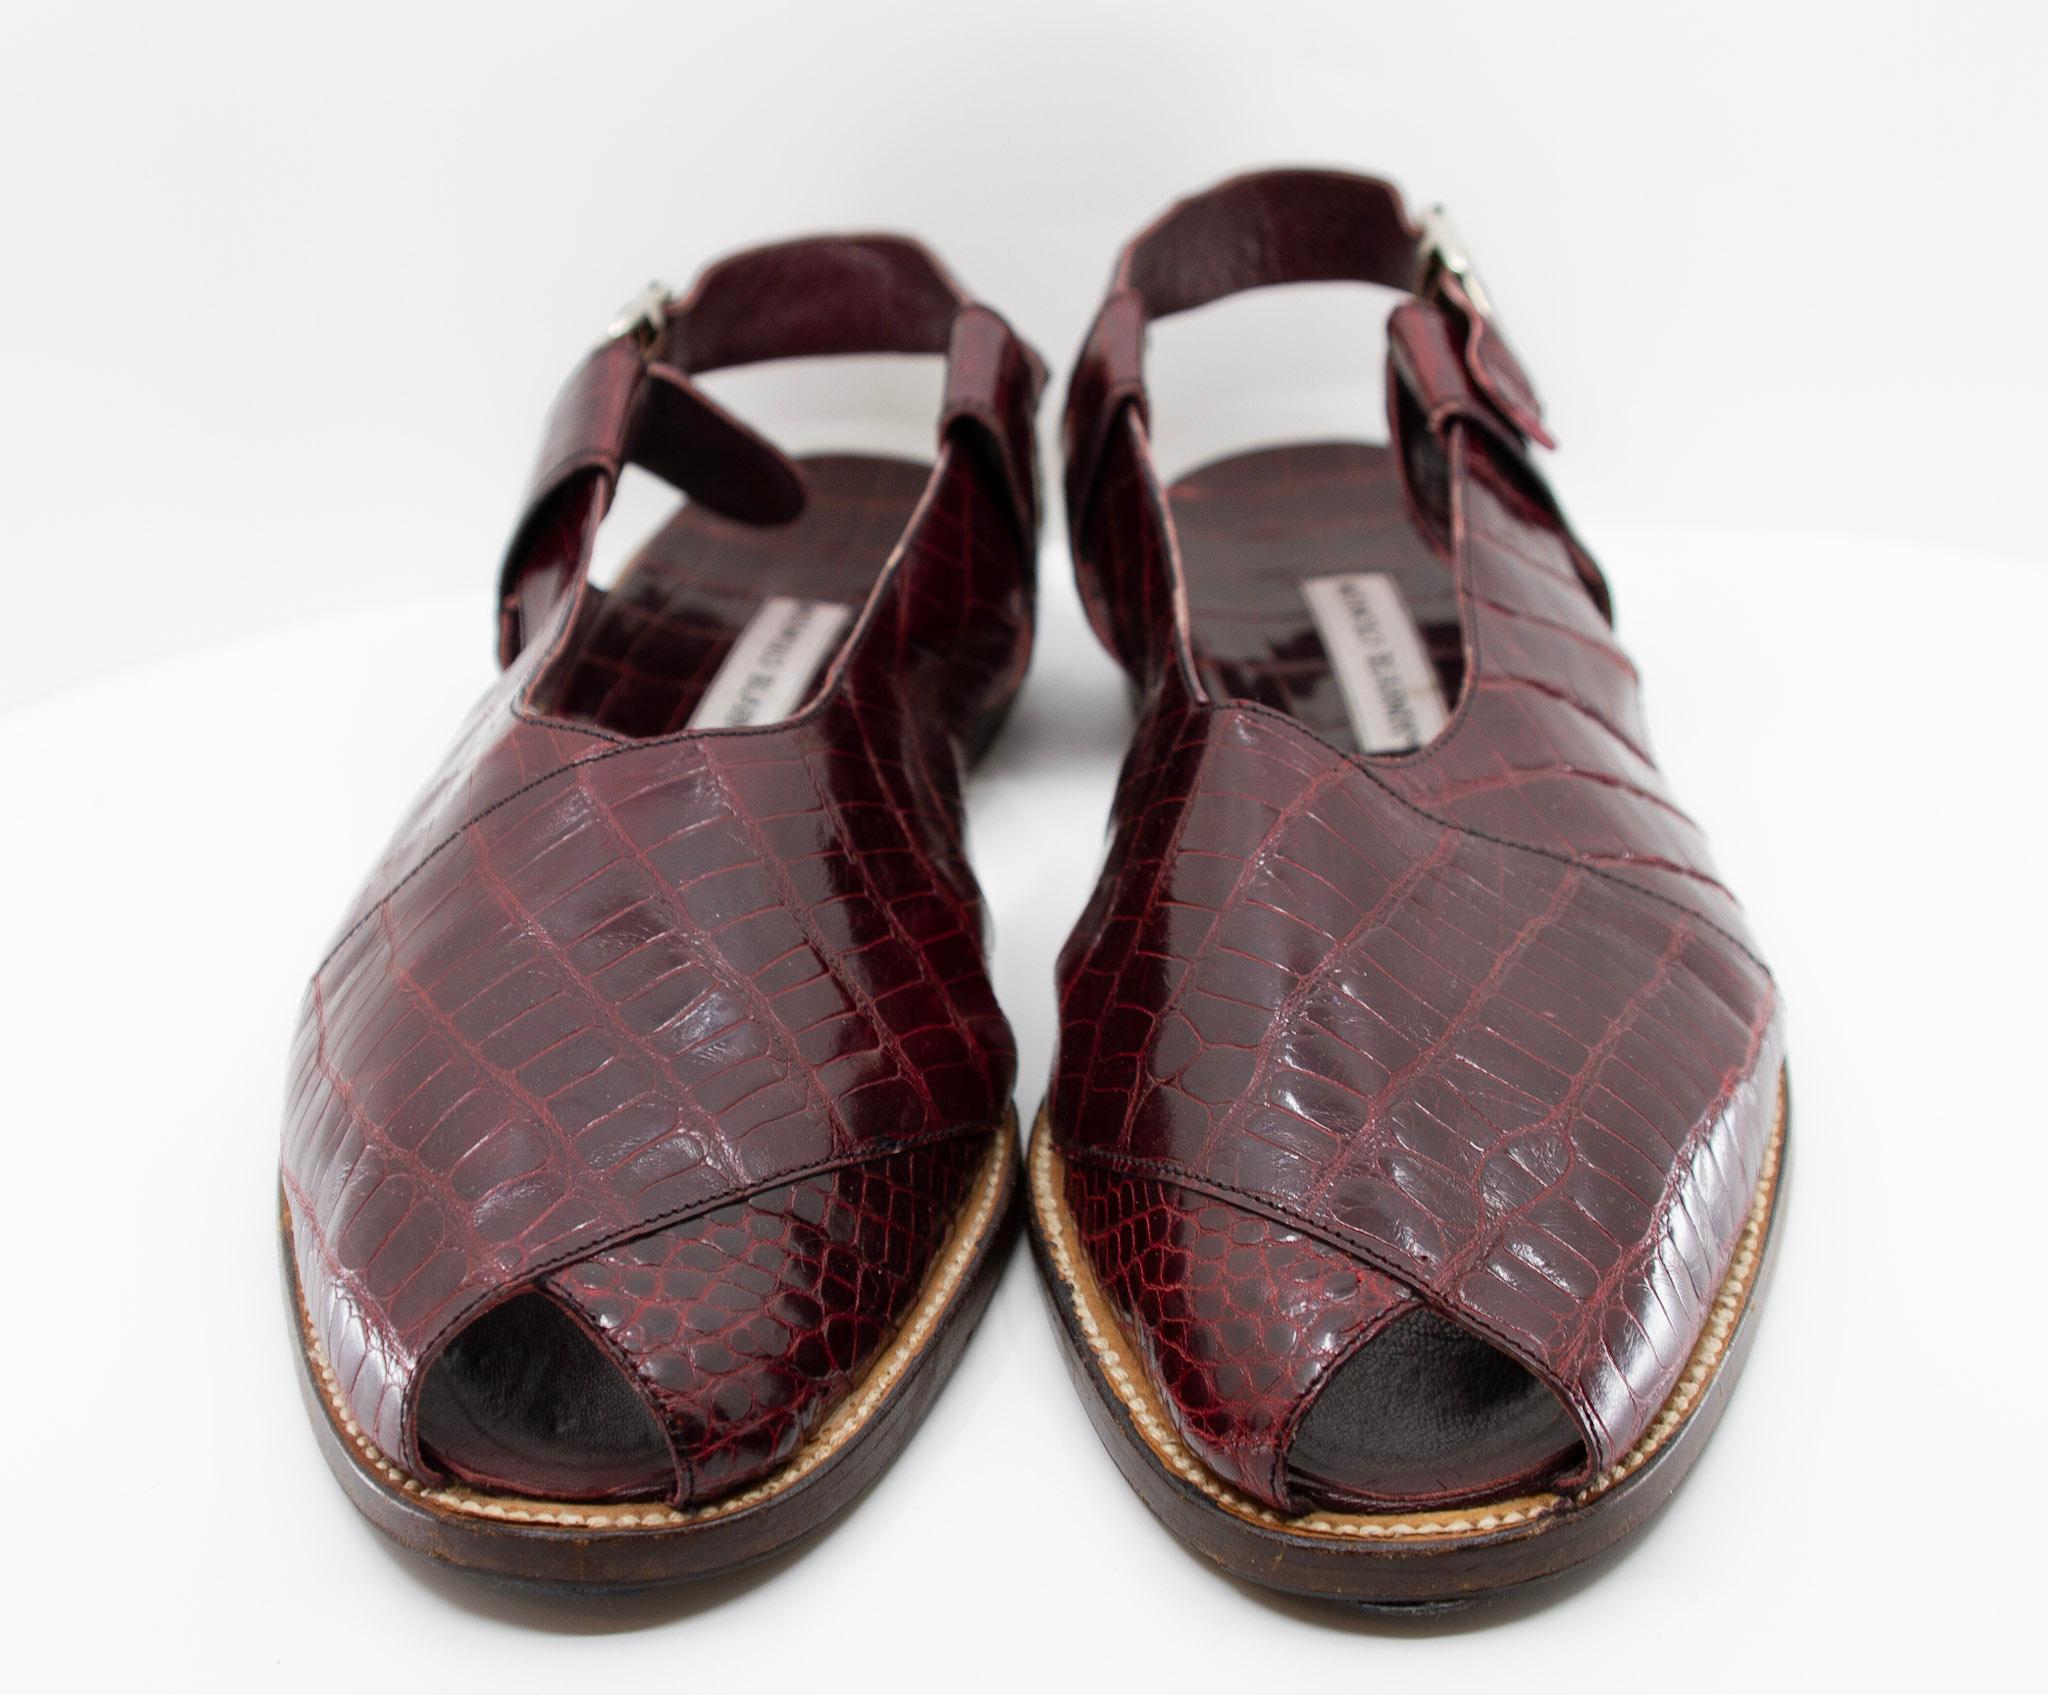 Manolo Blahnik, Aubergine Alligator Open Toe Sandal, Estate of André Leon Talley In Excellent Condition For Sale In Kingston, NY